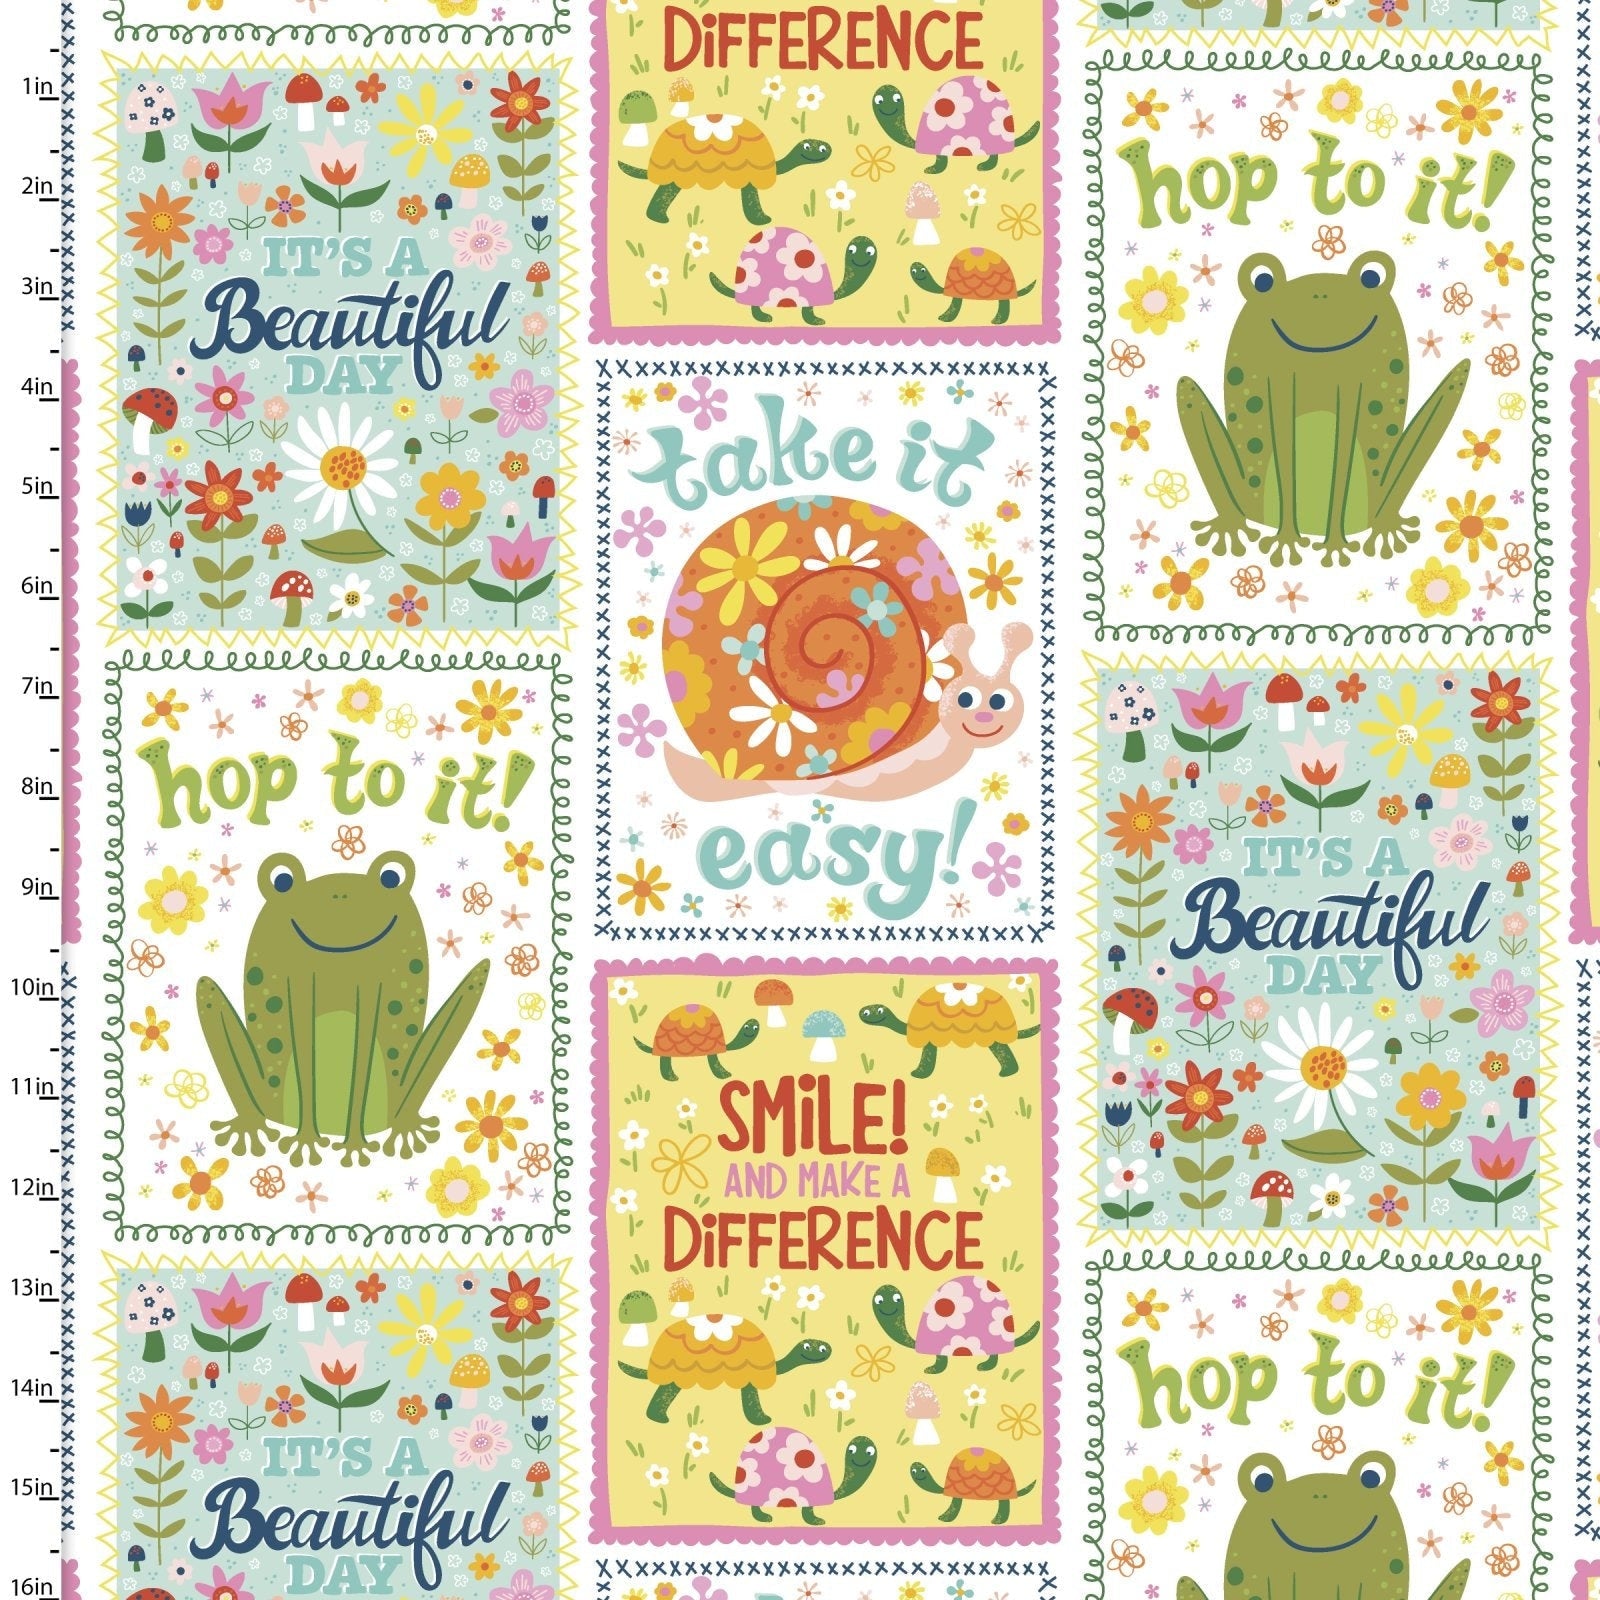 Susie Sunshine Sunshine Patch Fabric - 3 Wishes Fabric 20707-WHT, Colorful Inspirational Words Fabric By the Yard